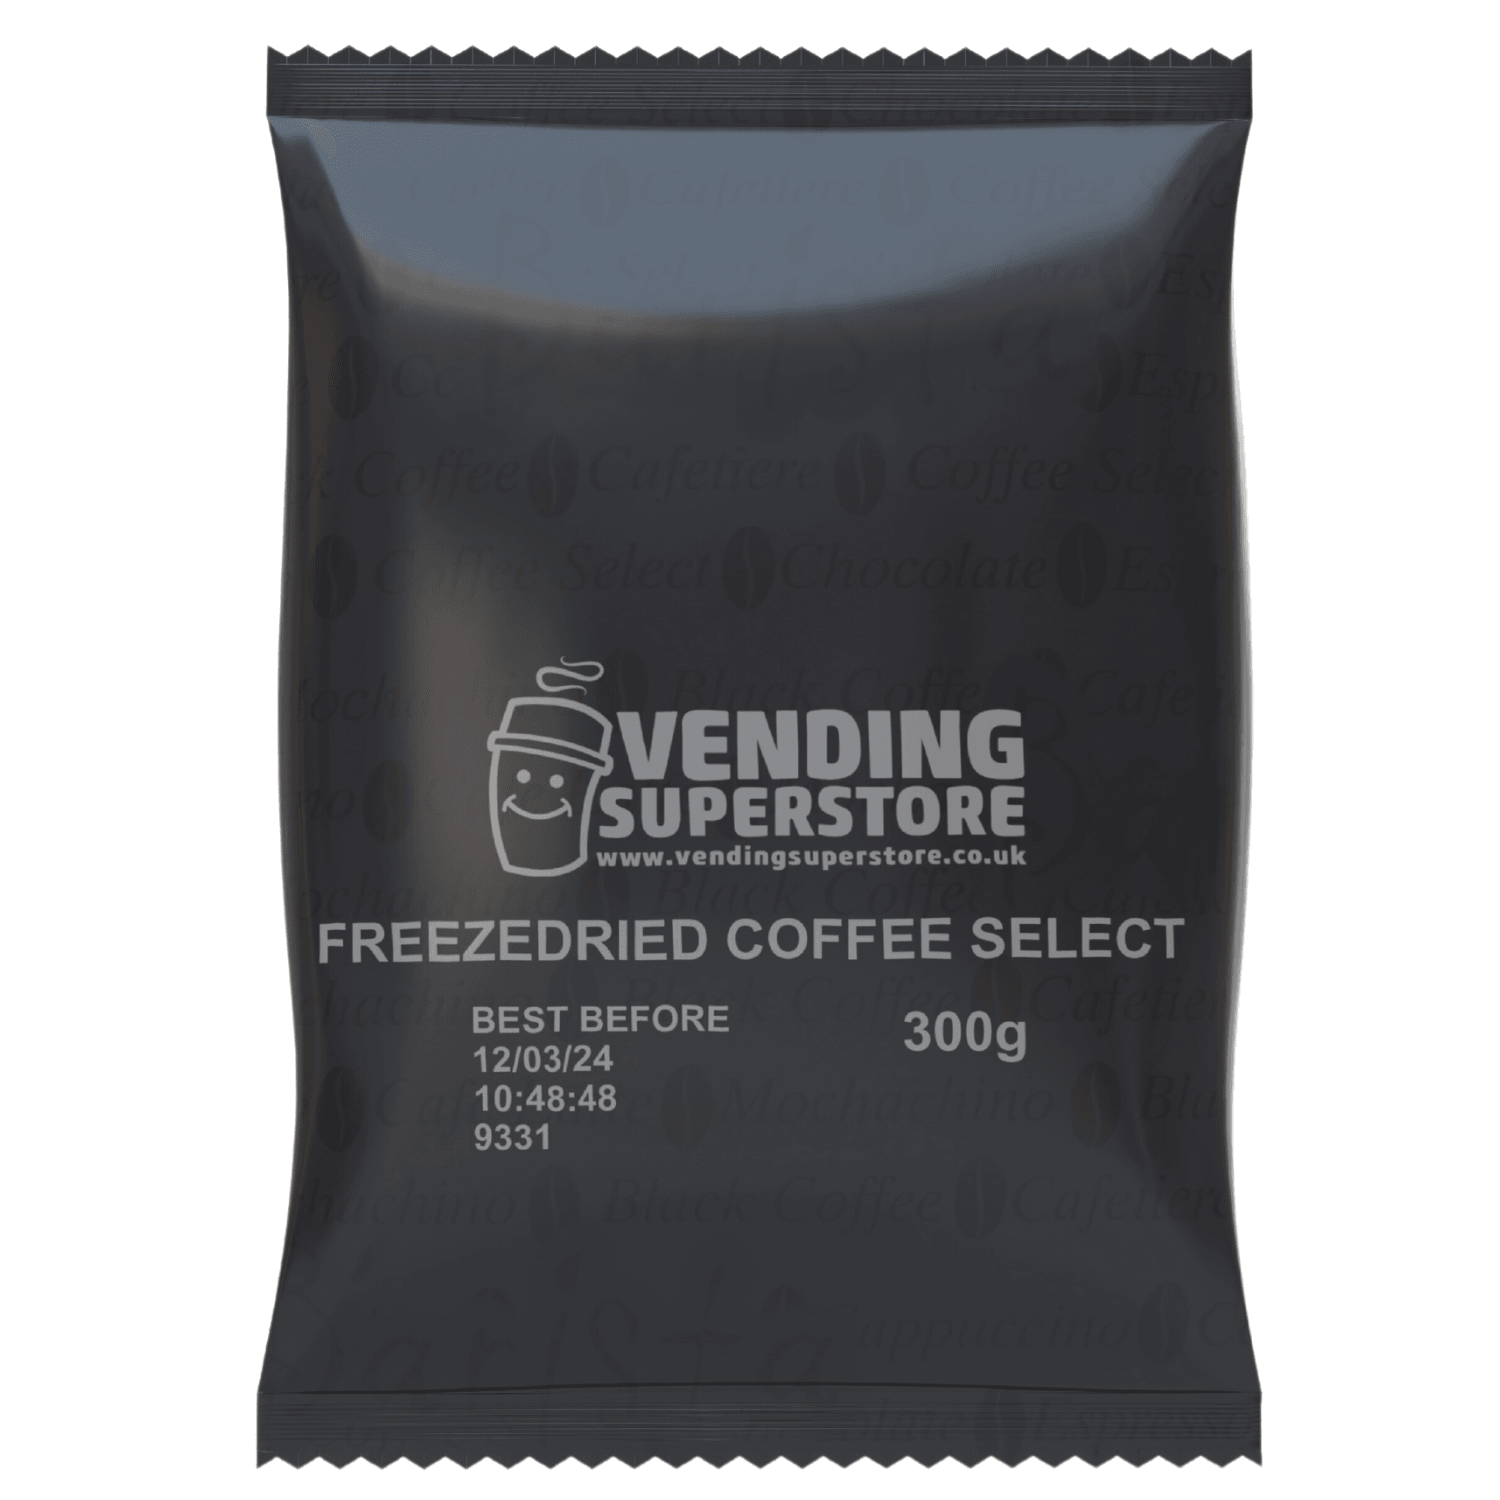 Vending Superstore - Freezedried Coffee Select Vending Coffee - Single 300g Bag - Vending Superstore